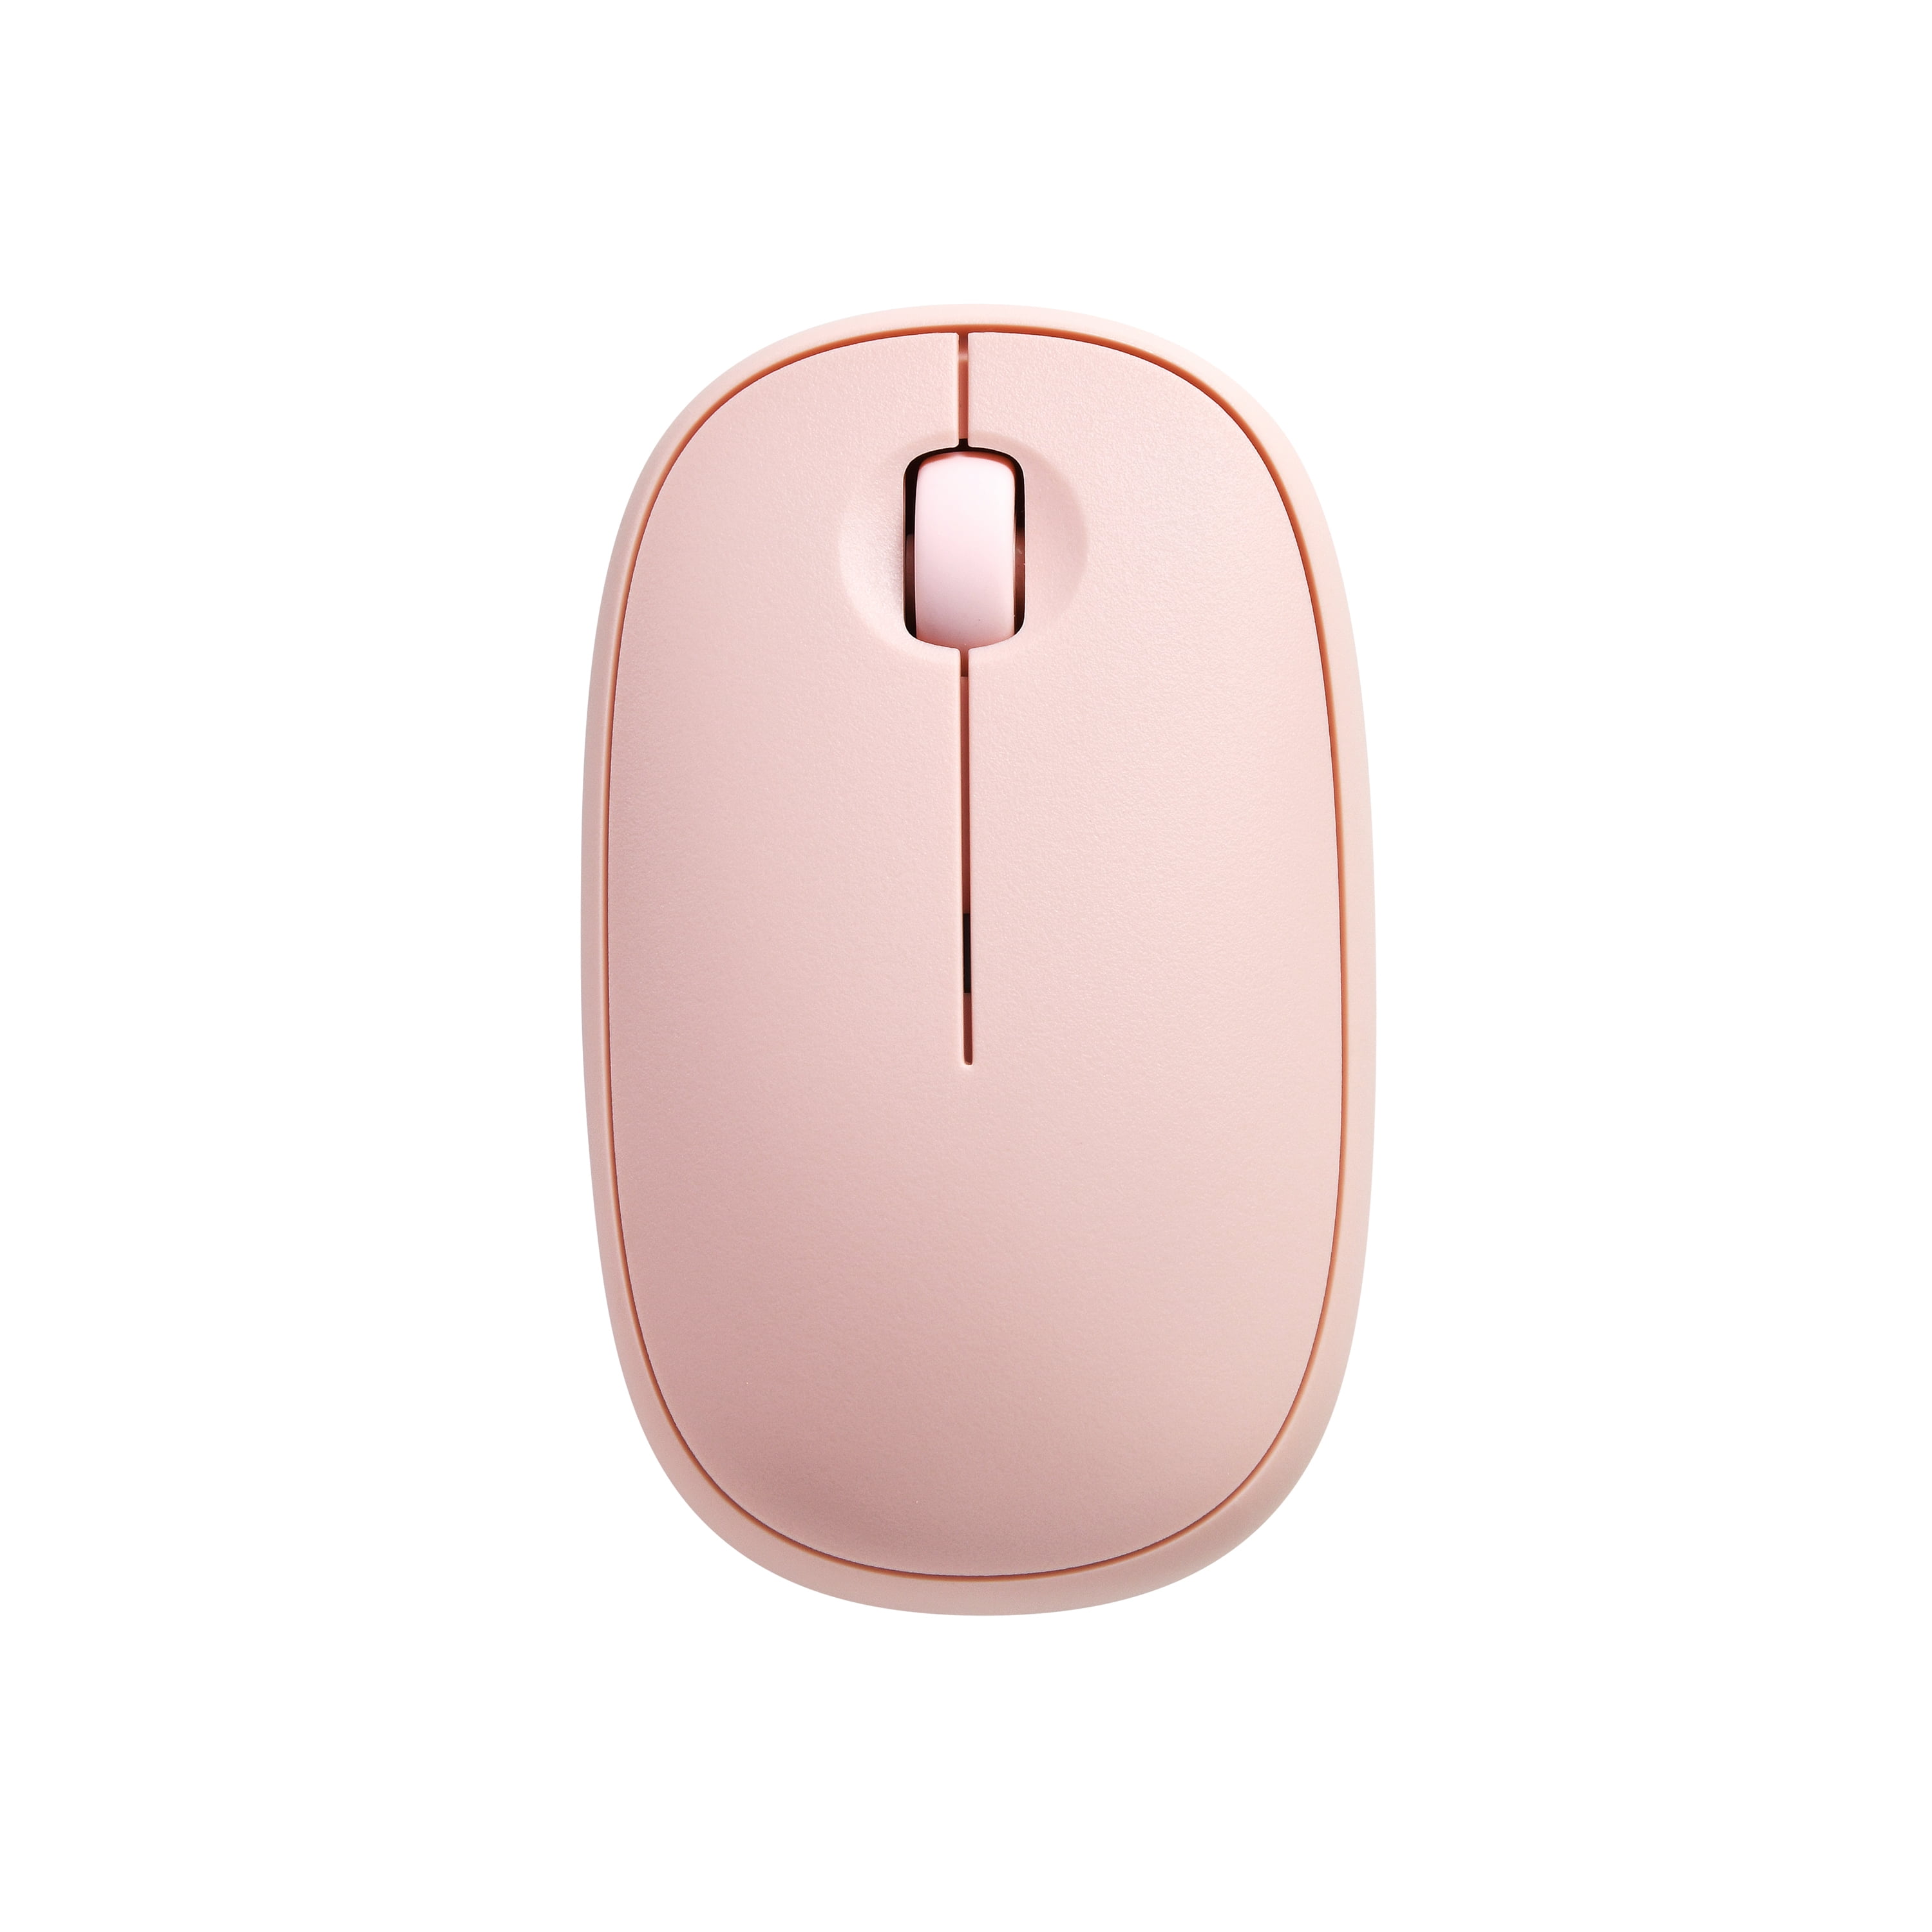 onn. Slim Wireless 3-Button Computer Mouse, Bluetooth and Nano receiver, 1600 DPI, Pink